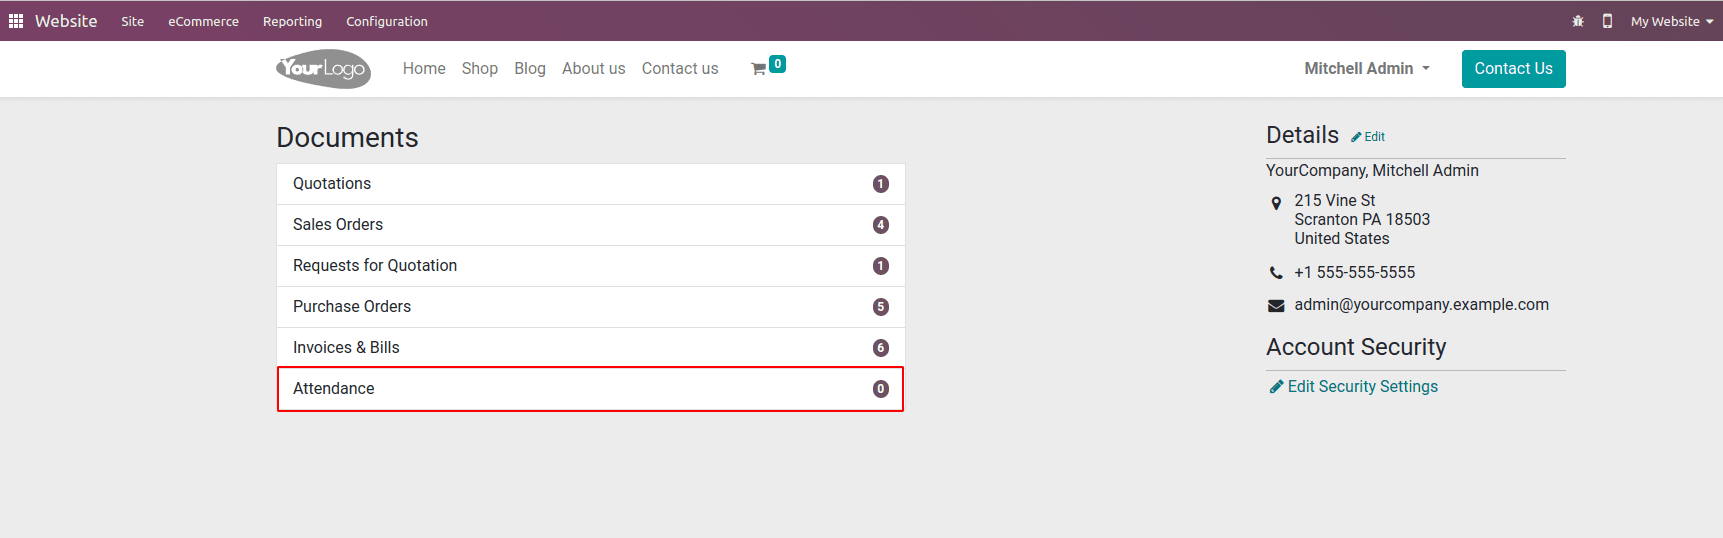 how-to-add-filters-option-in-website-portal-documents-in-odoo-16-1-cybrosys